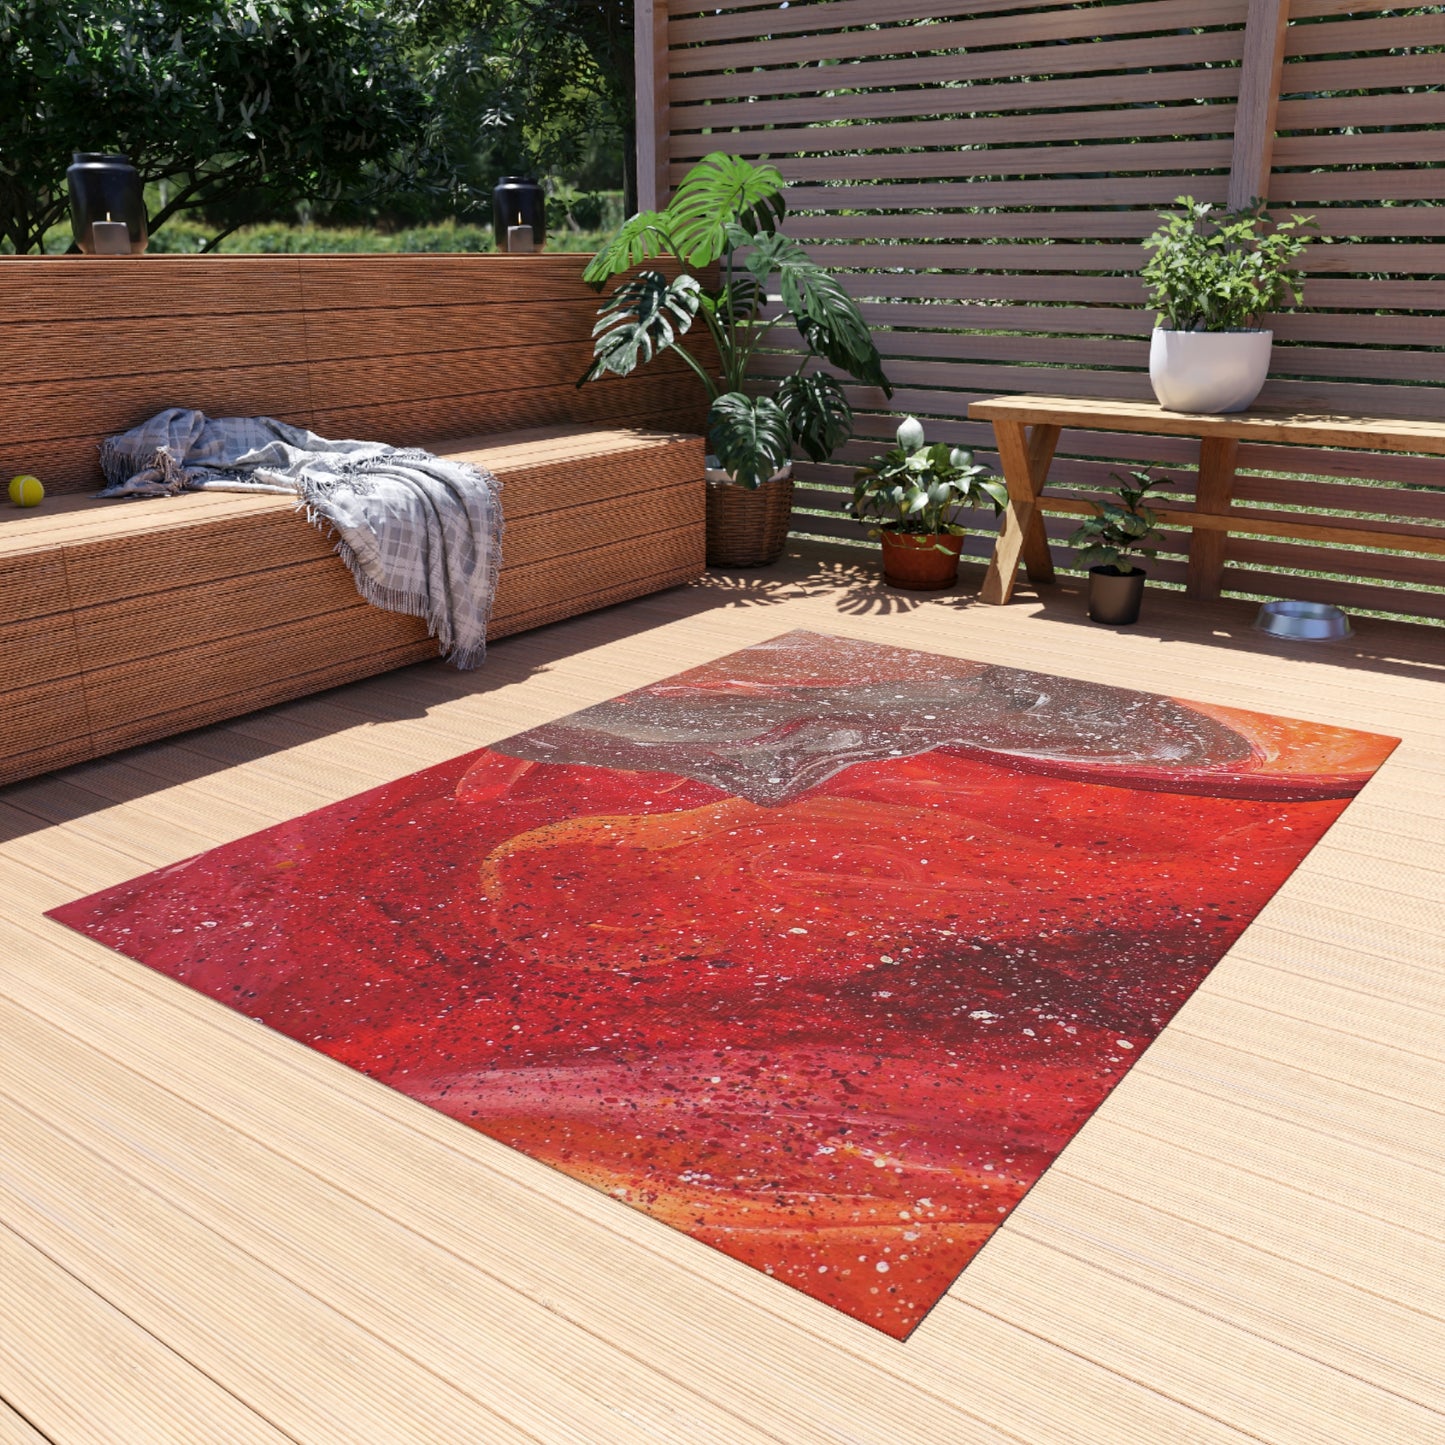 Waves of Creation Painting Outdoor Rug